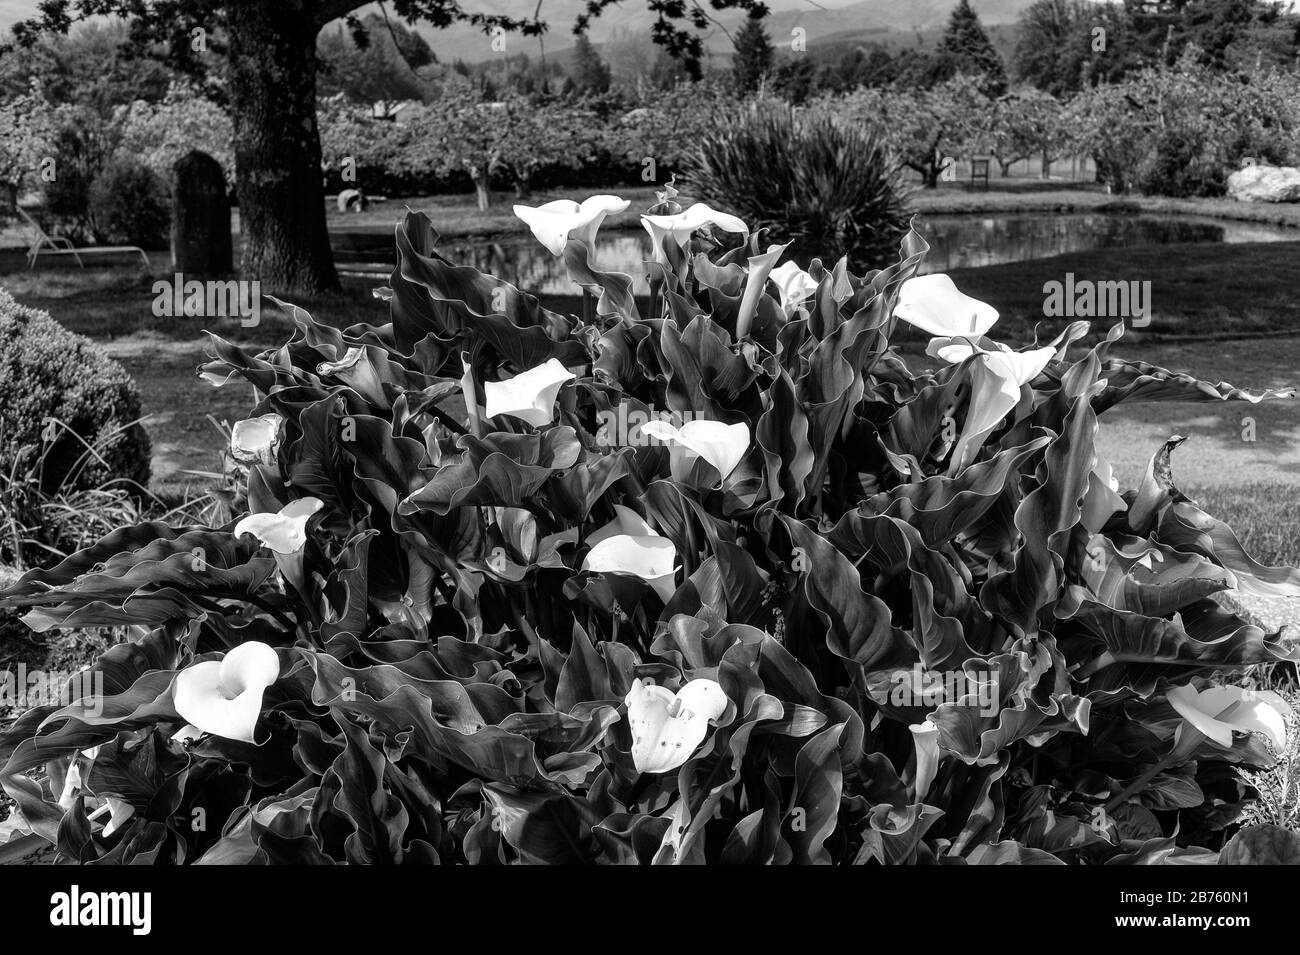 Colonia dignidad Black and White Stock Photos & Images - Alamy